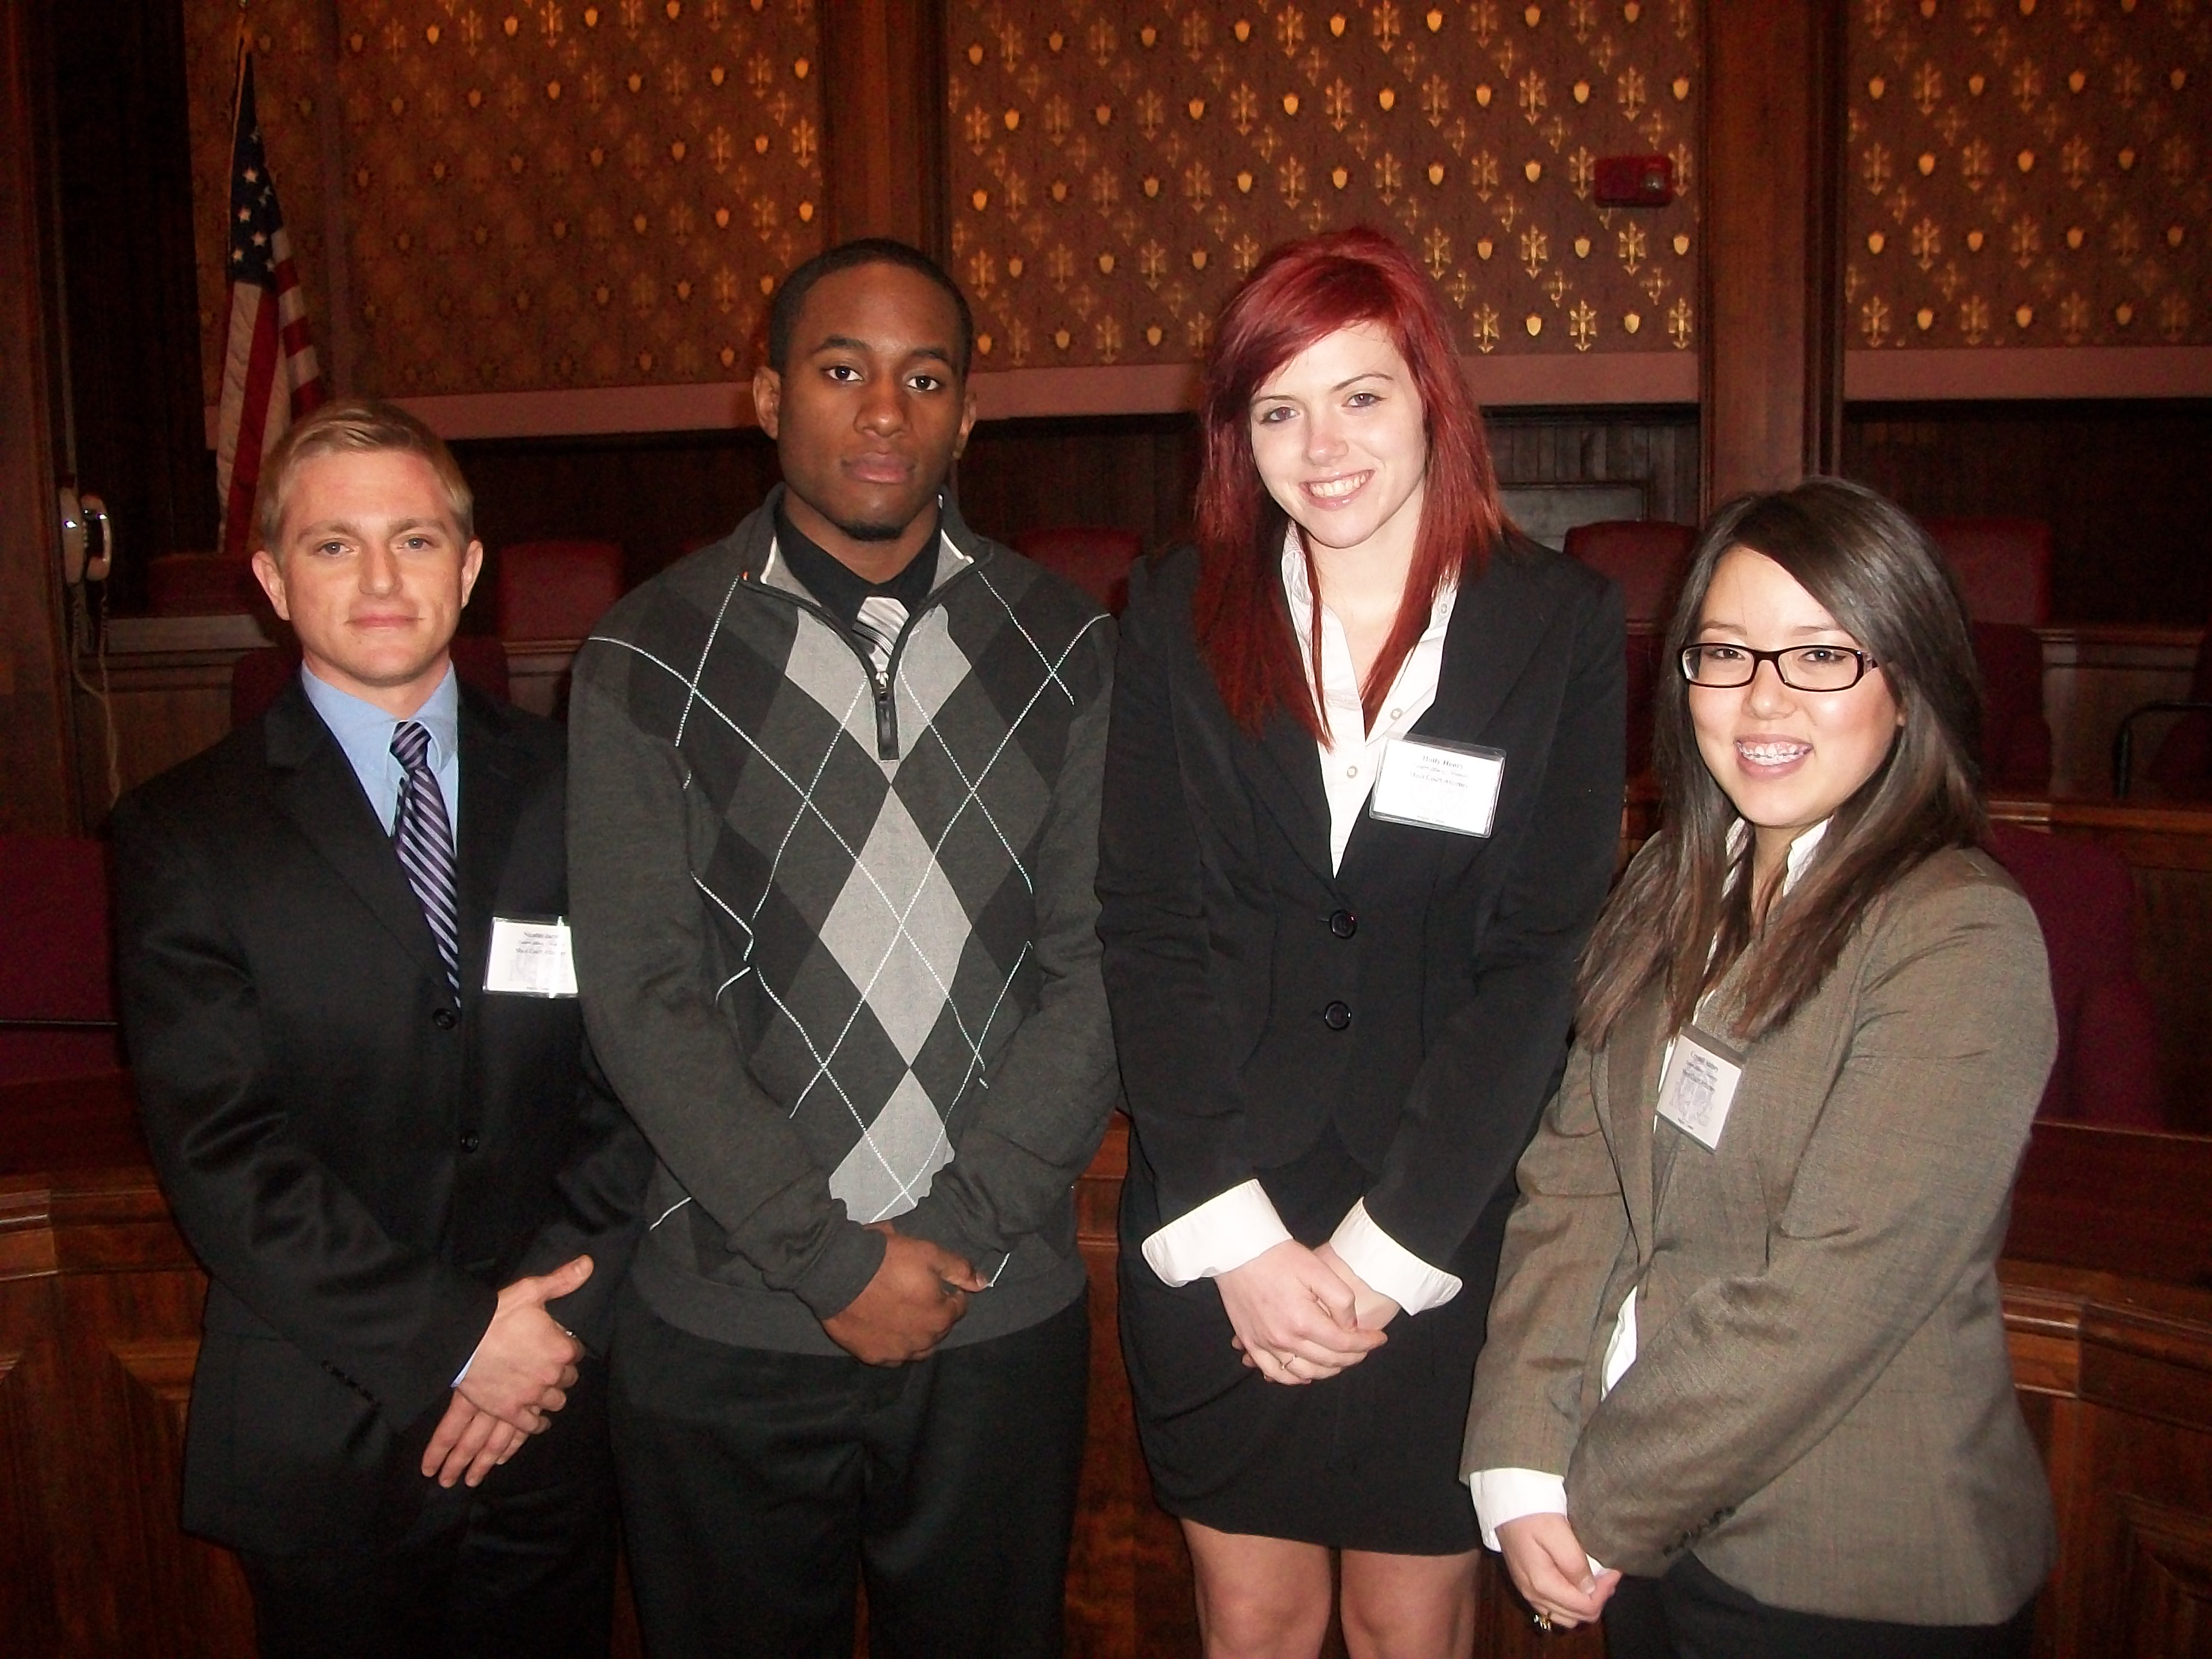 Nic Jacob, Cyle Catlett, Holly Henry, and Crystal Abbey, members of the EIU Moot Court team, compete at the 2011 Model Illinois Government Moot Court Tournament in Springfield.